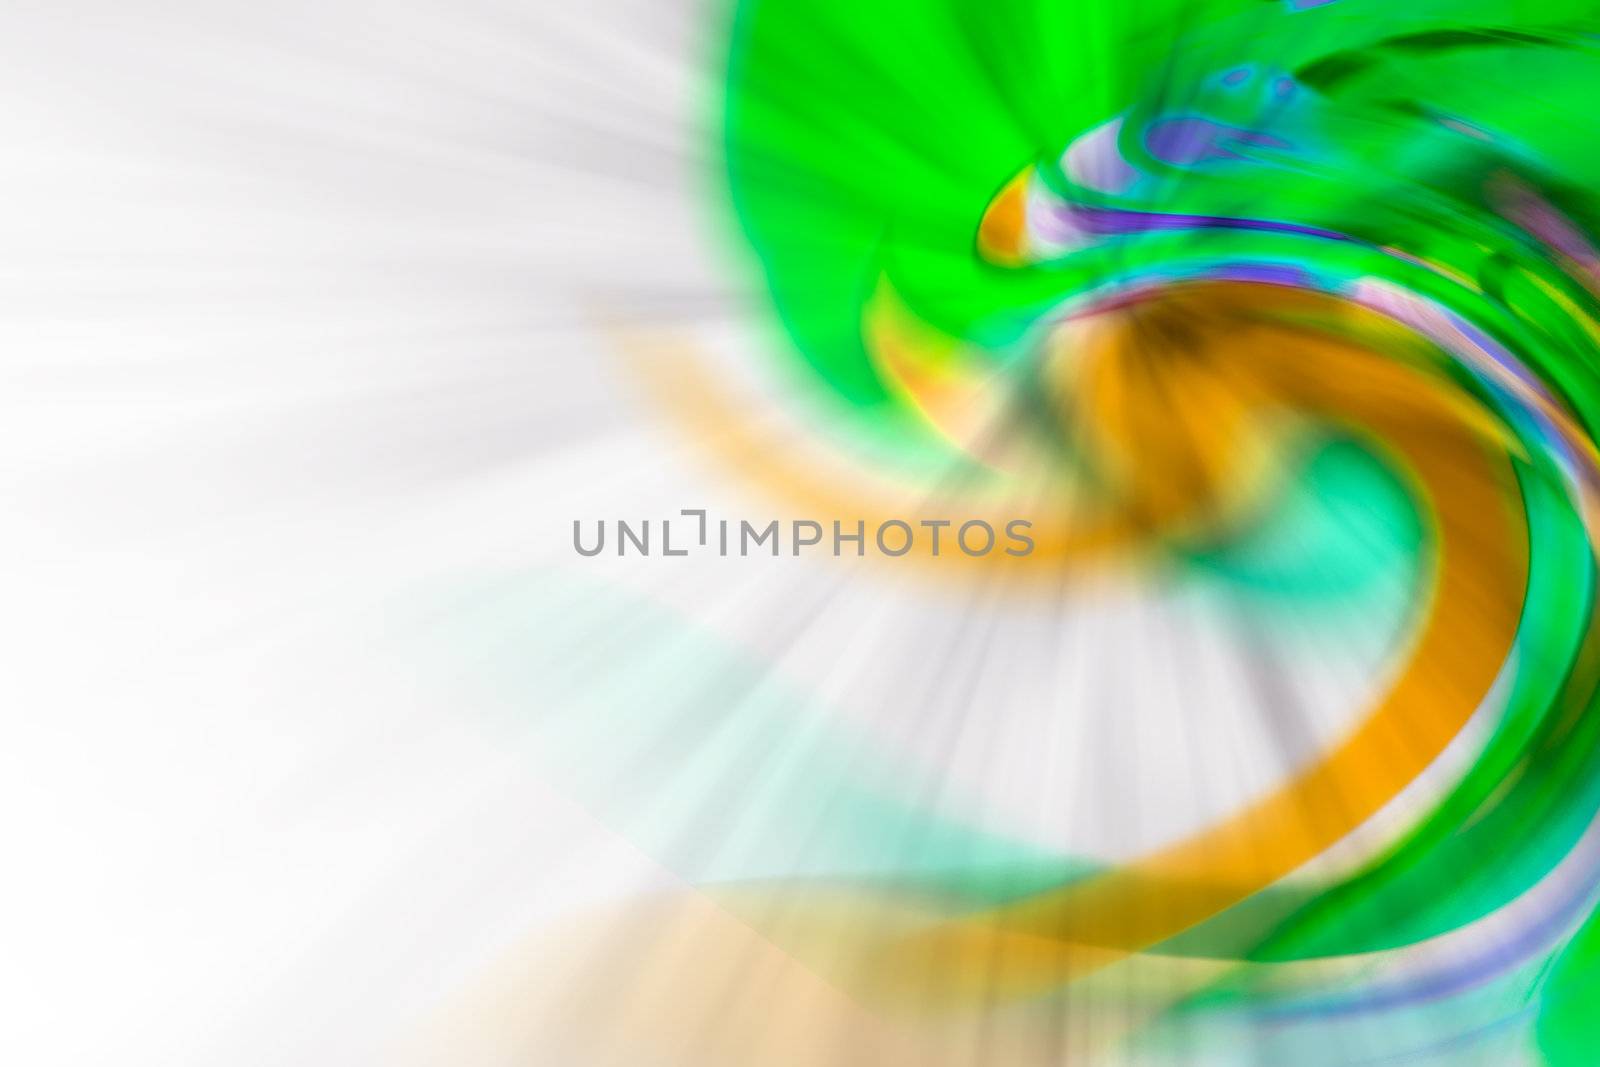 It is a beautiful abstract colorful background.